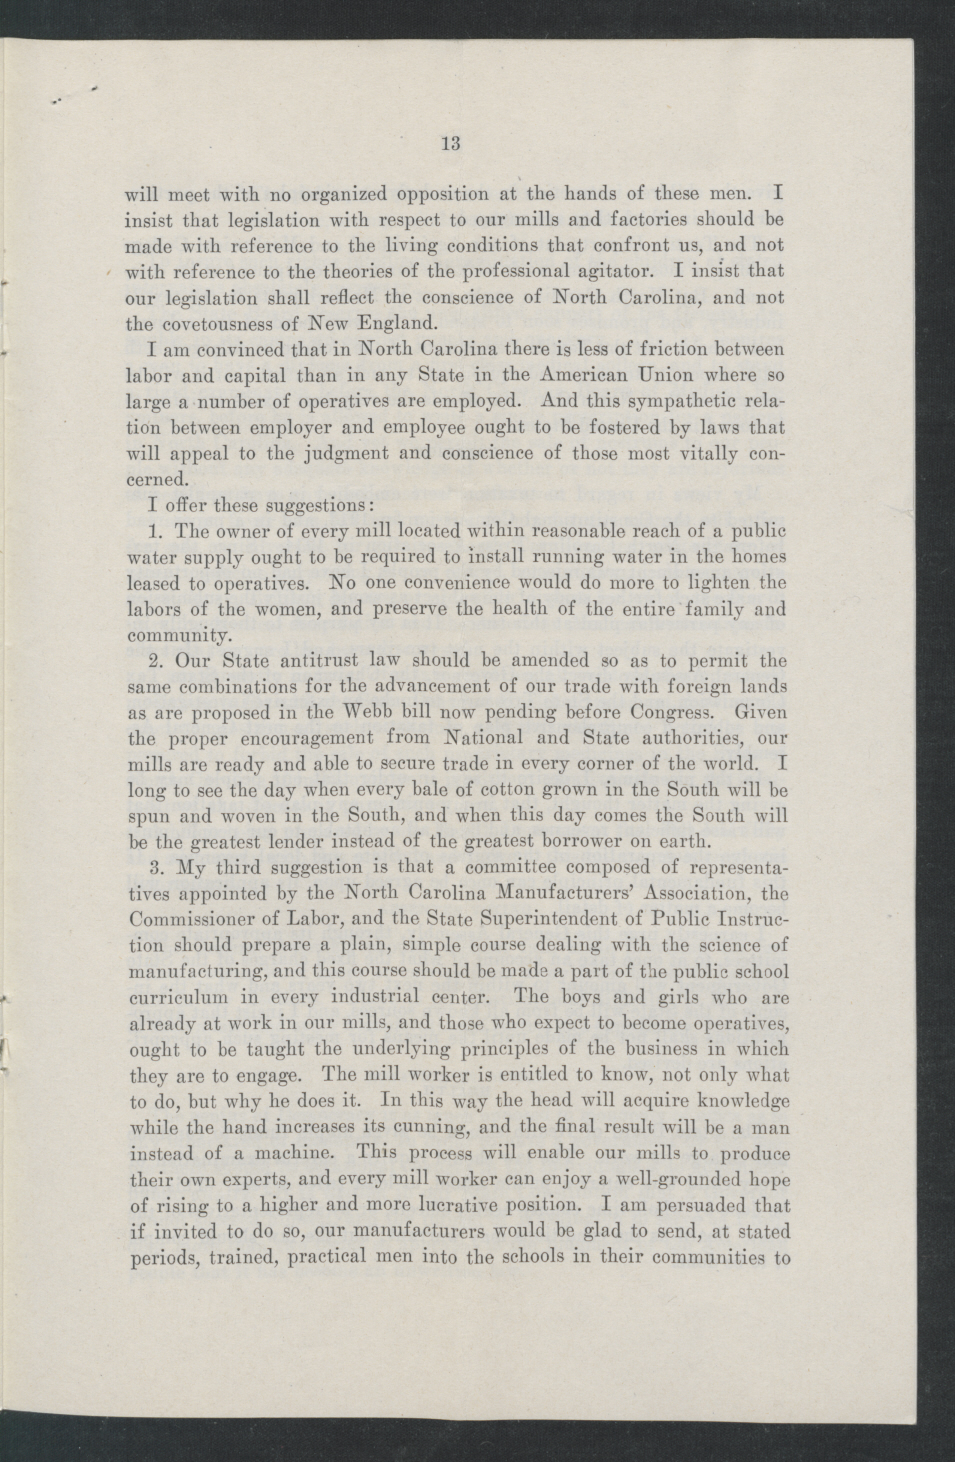 Inaugural Address of Governor Thomas W. Bickett to the General Assembly, January 11, 1917, page 11